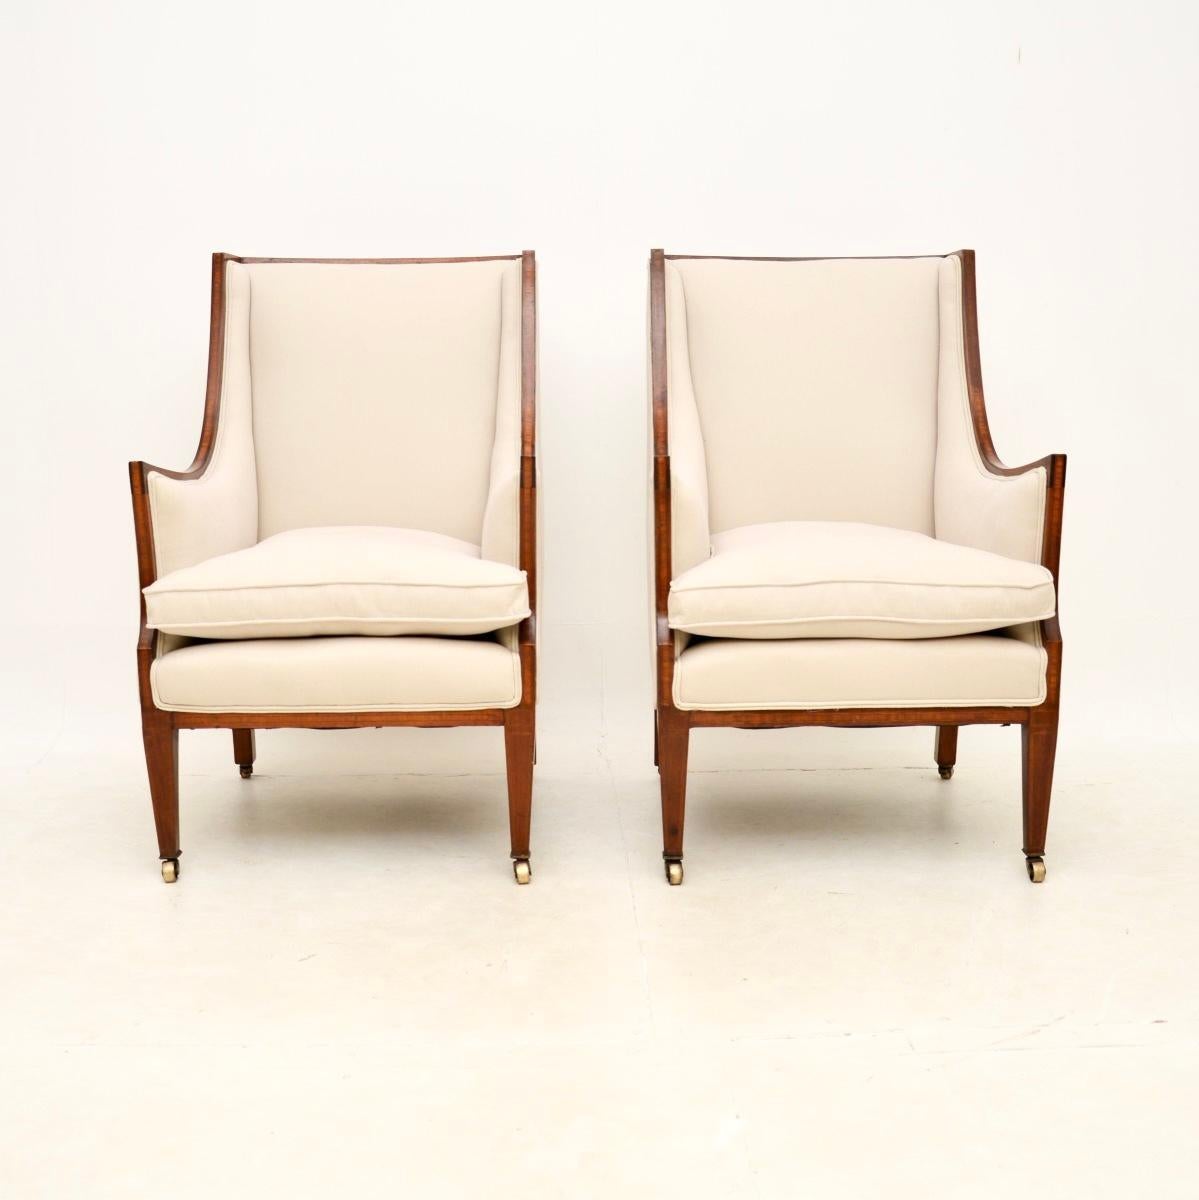 British Pair of Antique Edwardian Armchairs For Sale